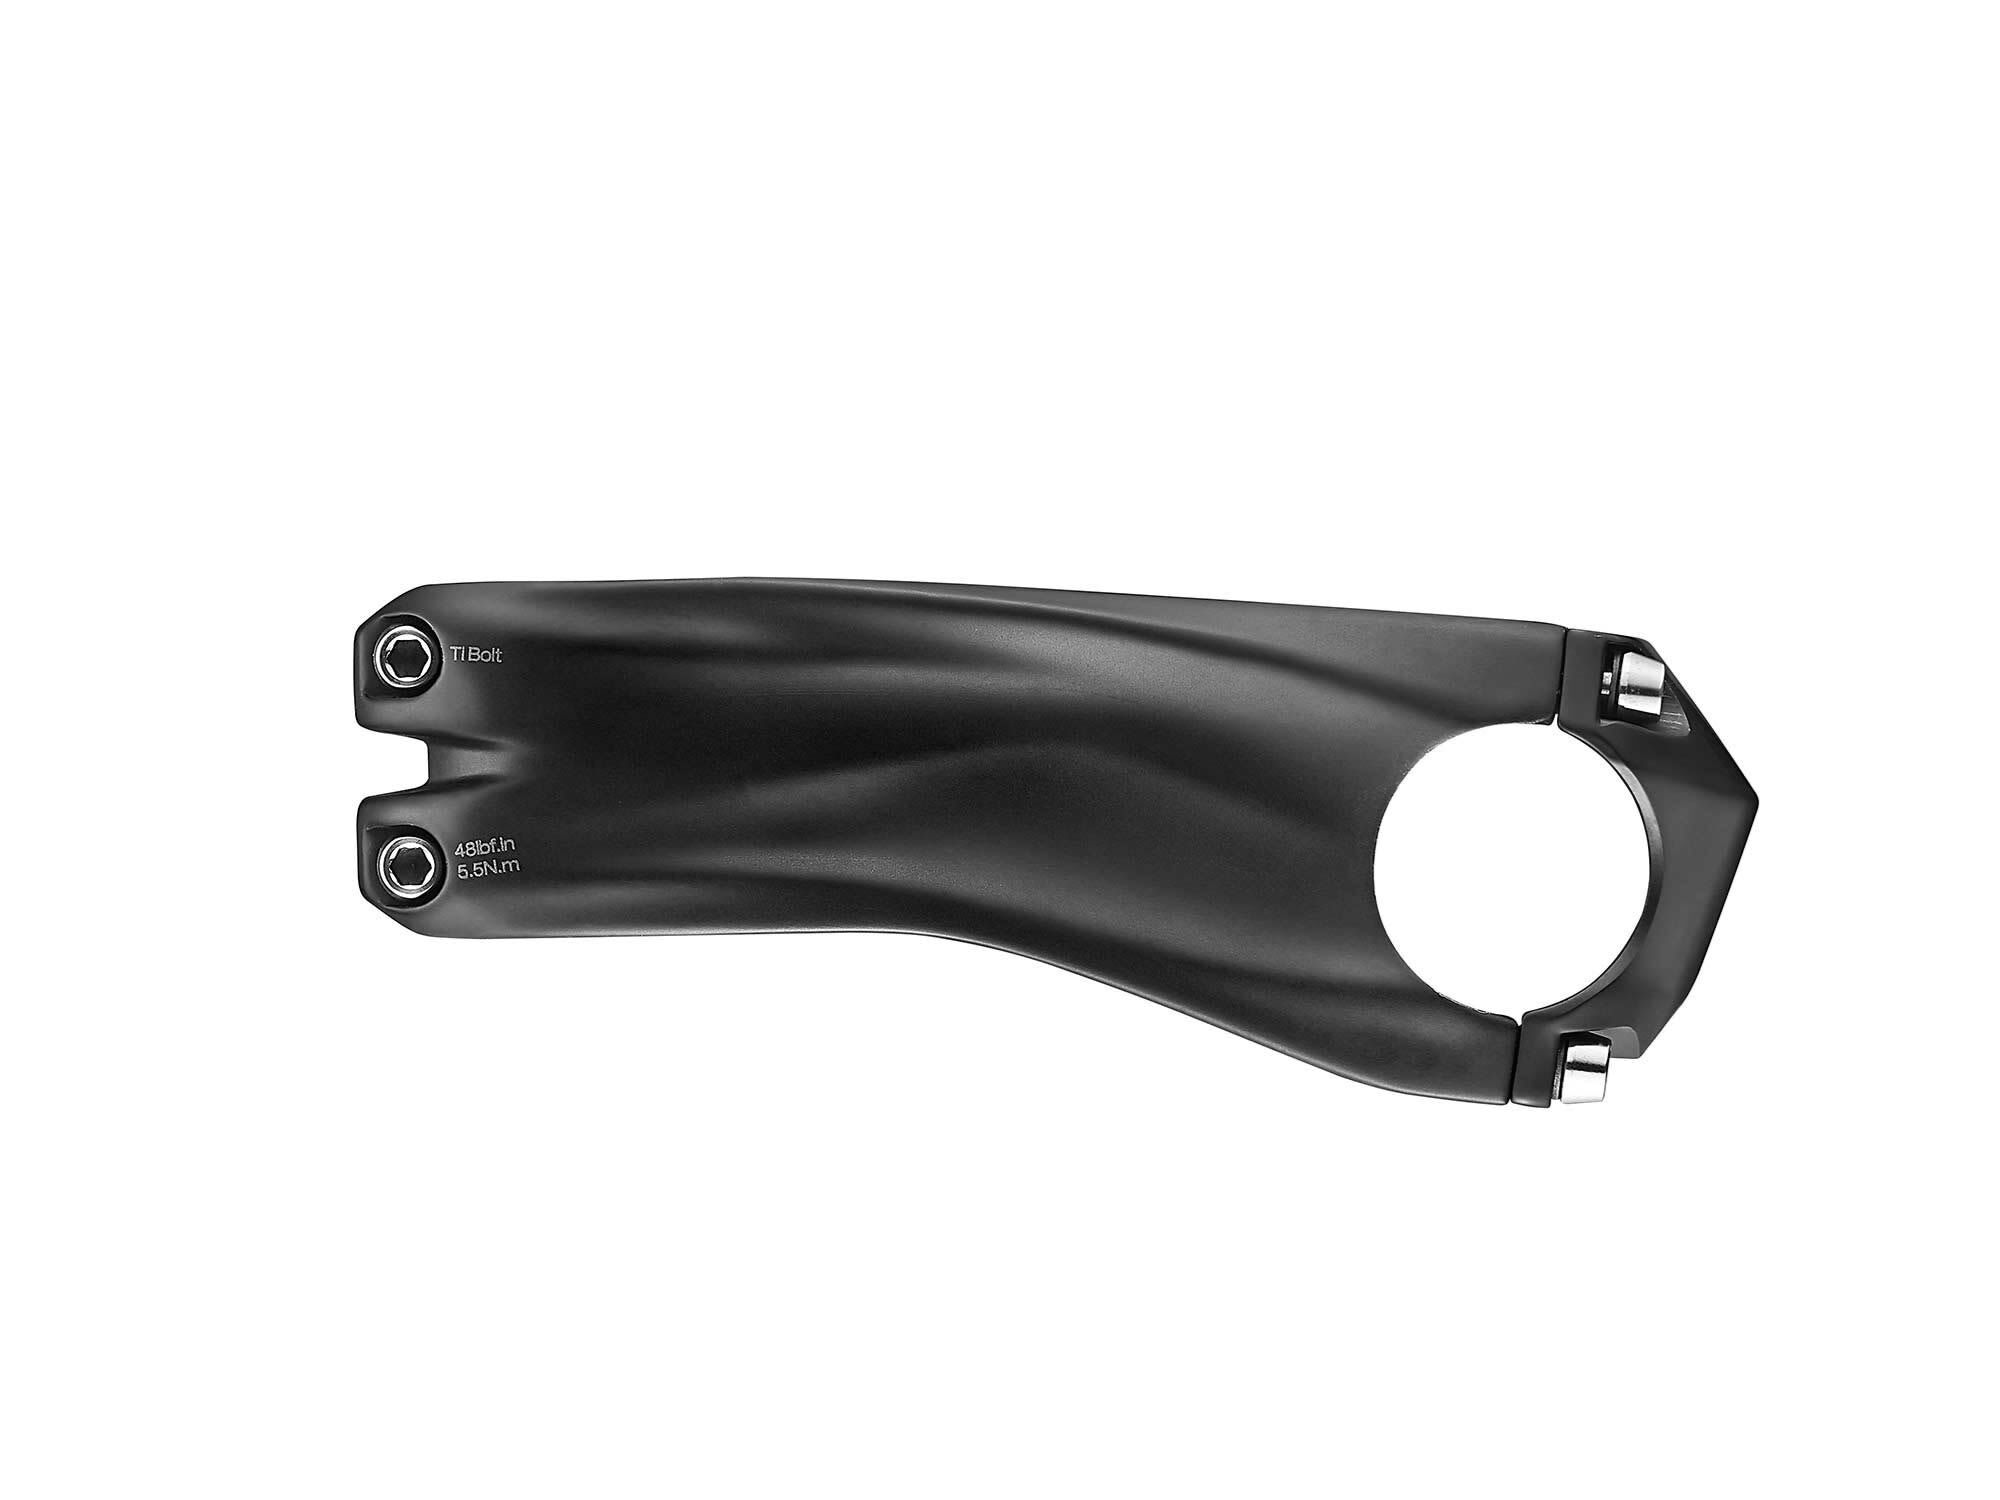 GIANT Contact SLR Flux Carbon Stem £219.99 Components Stems  Cyclesense Tadcaster